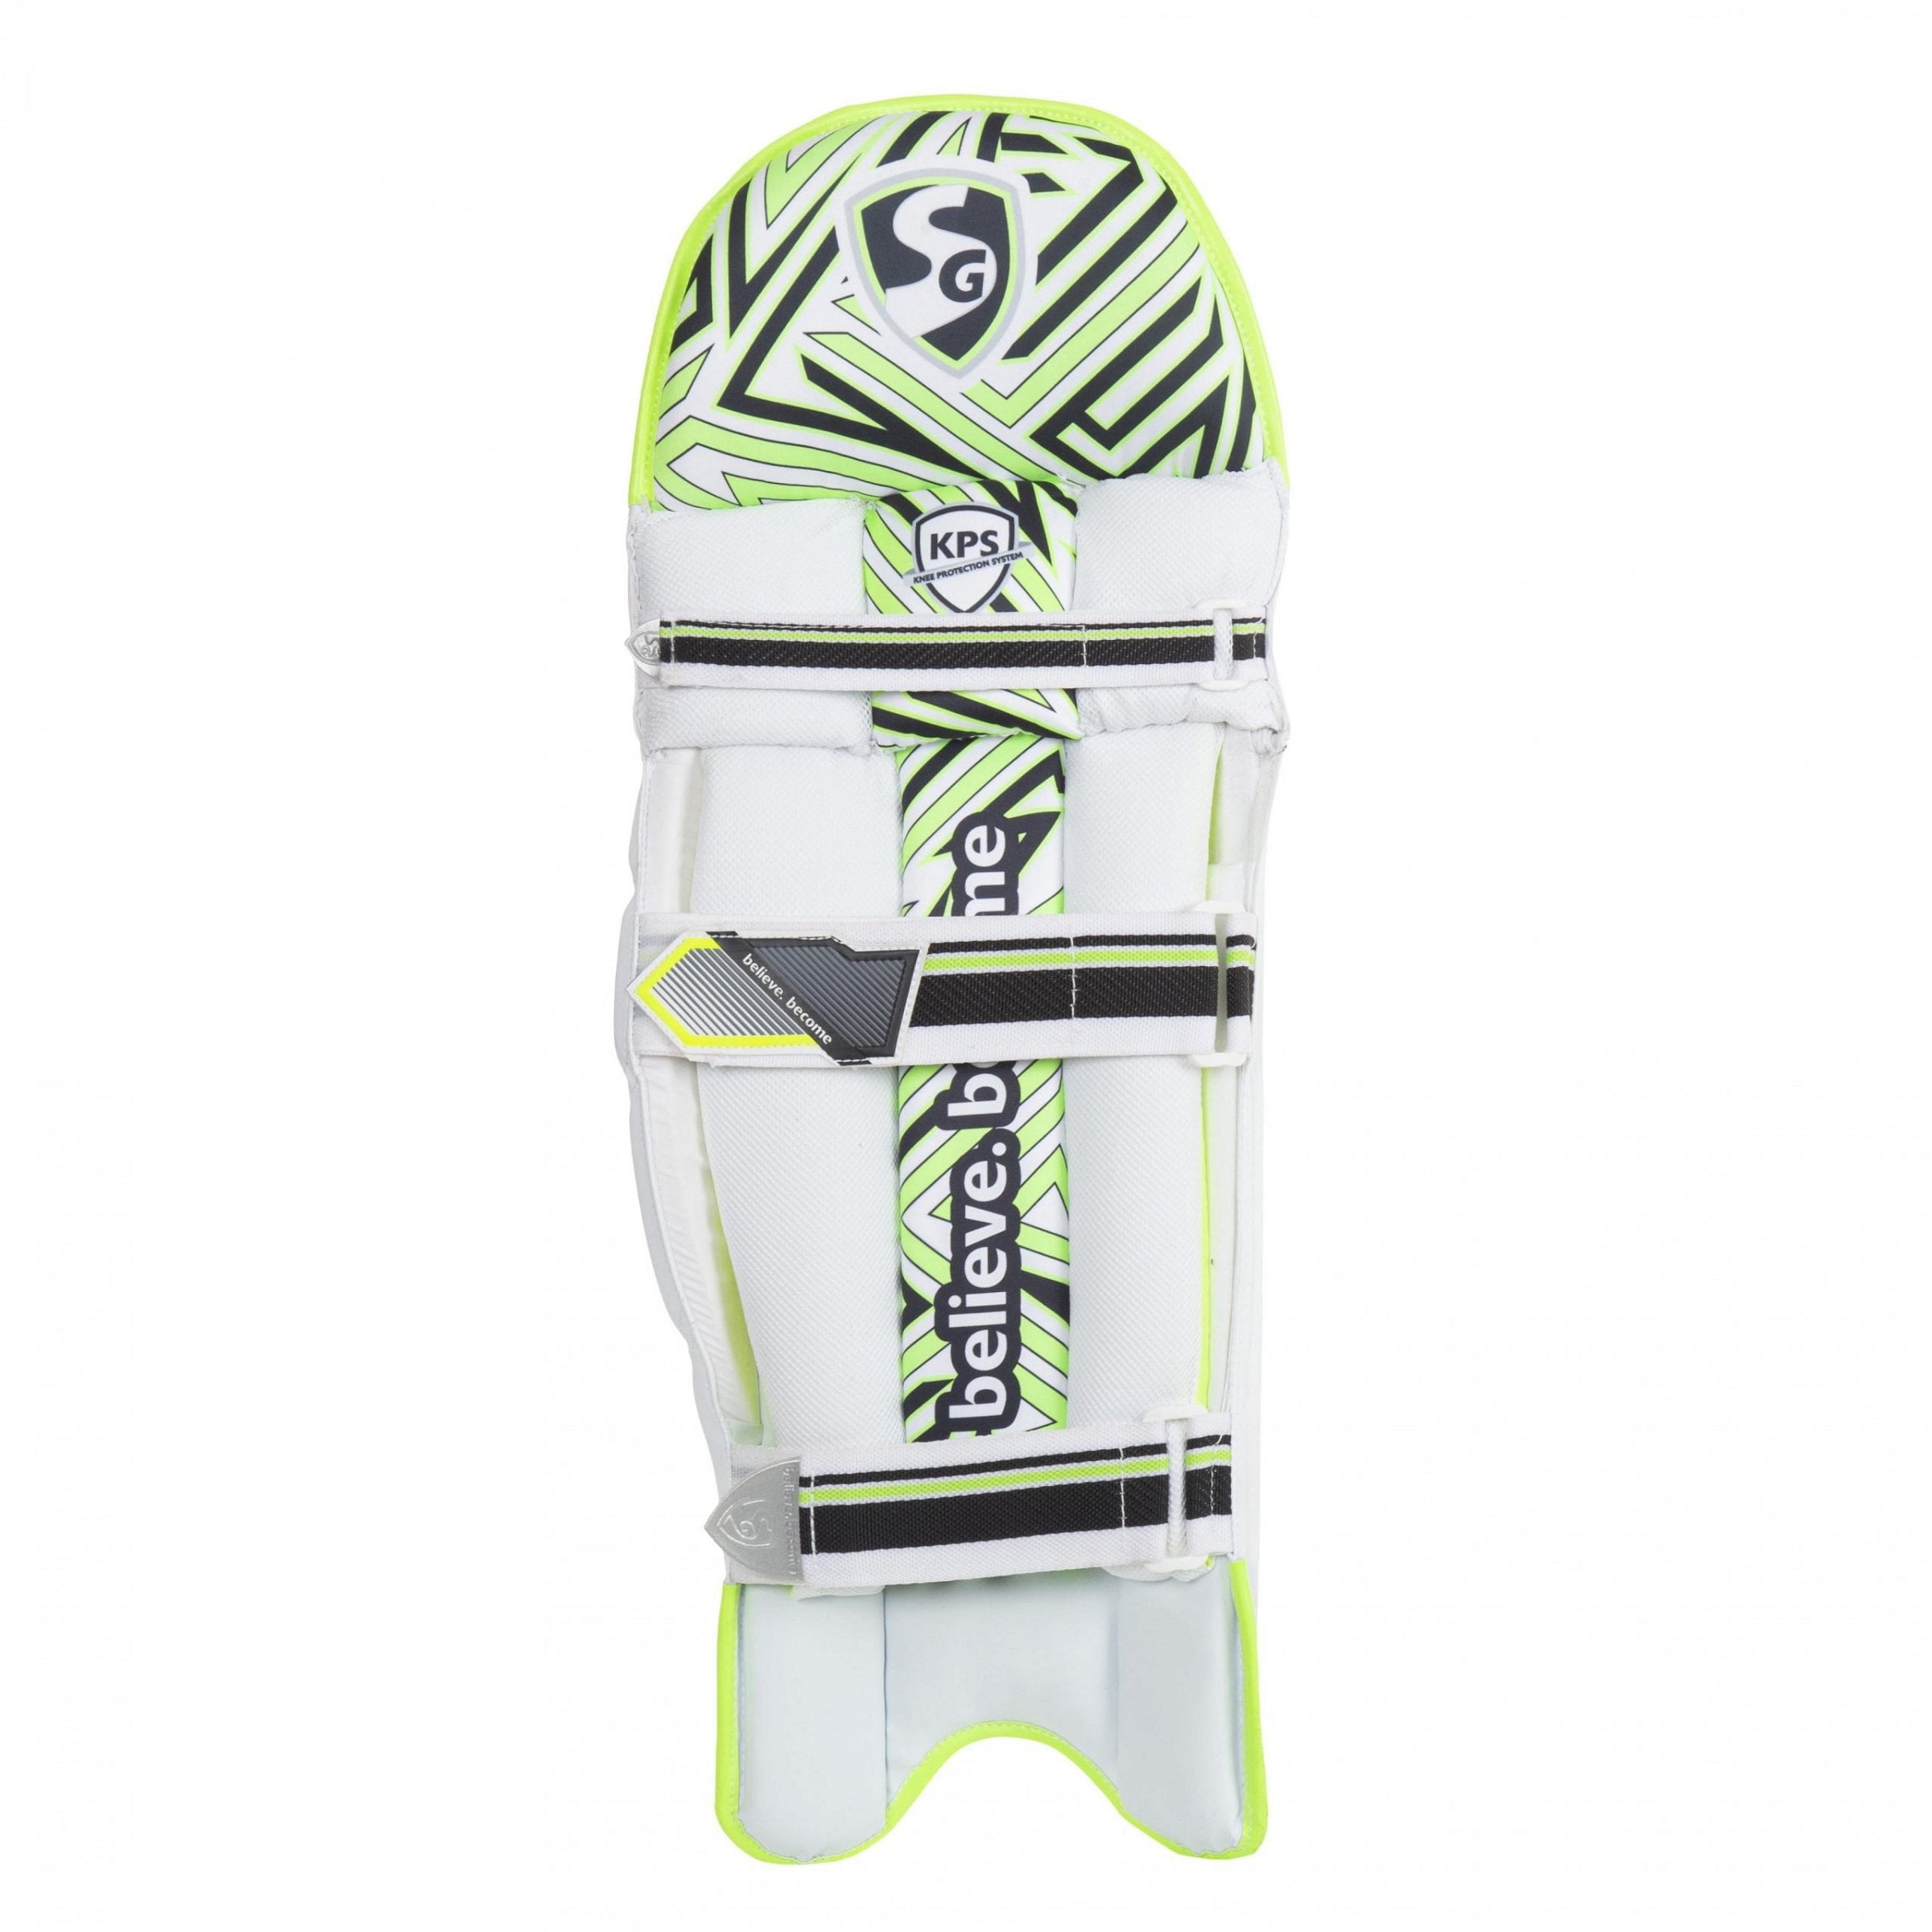 SS Cricket Gladiator Cricket Batting Gloves (Mens, For Right Hand Player)  in Wayanad at best price by Ethlits - Justdial